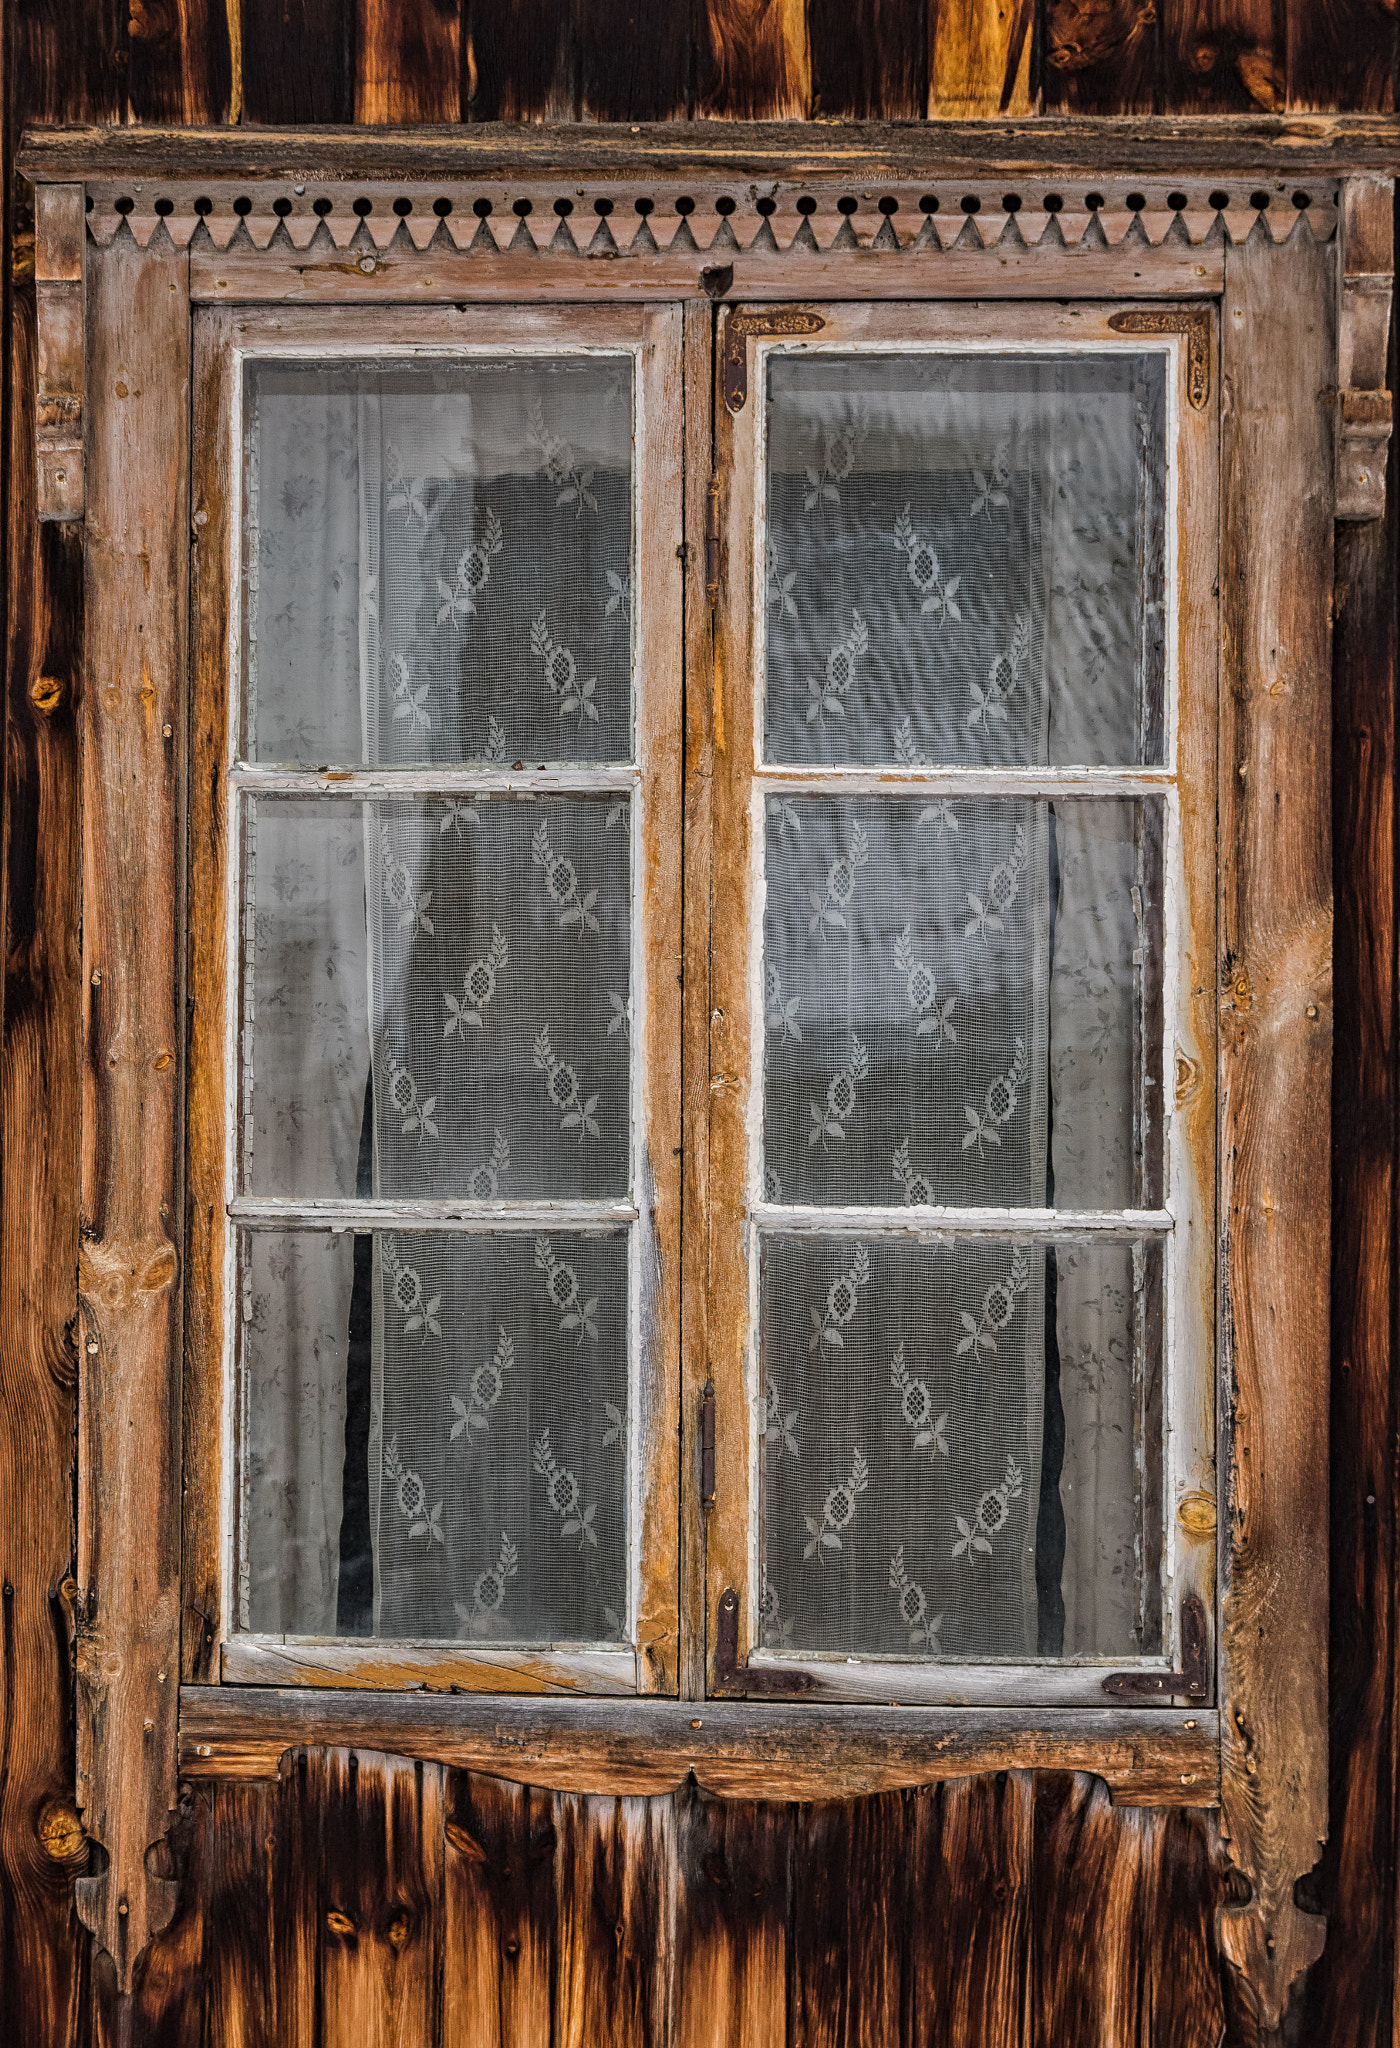 Canon EOS 80D + Sigma 17-70mm F2.8-4 DC Macro OS HSM | C sample photo. Window from abandoned farm house photography